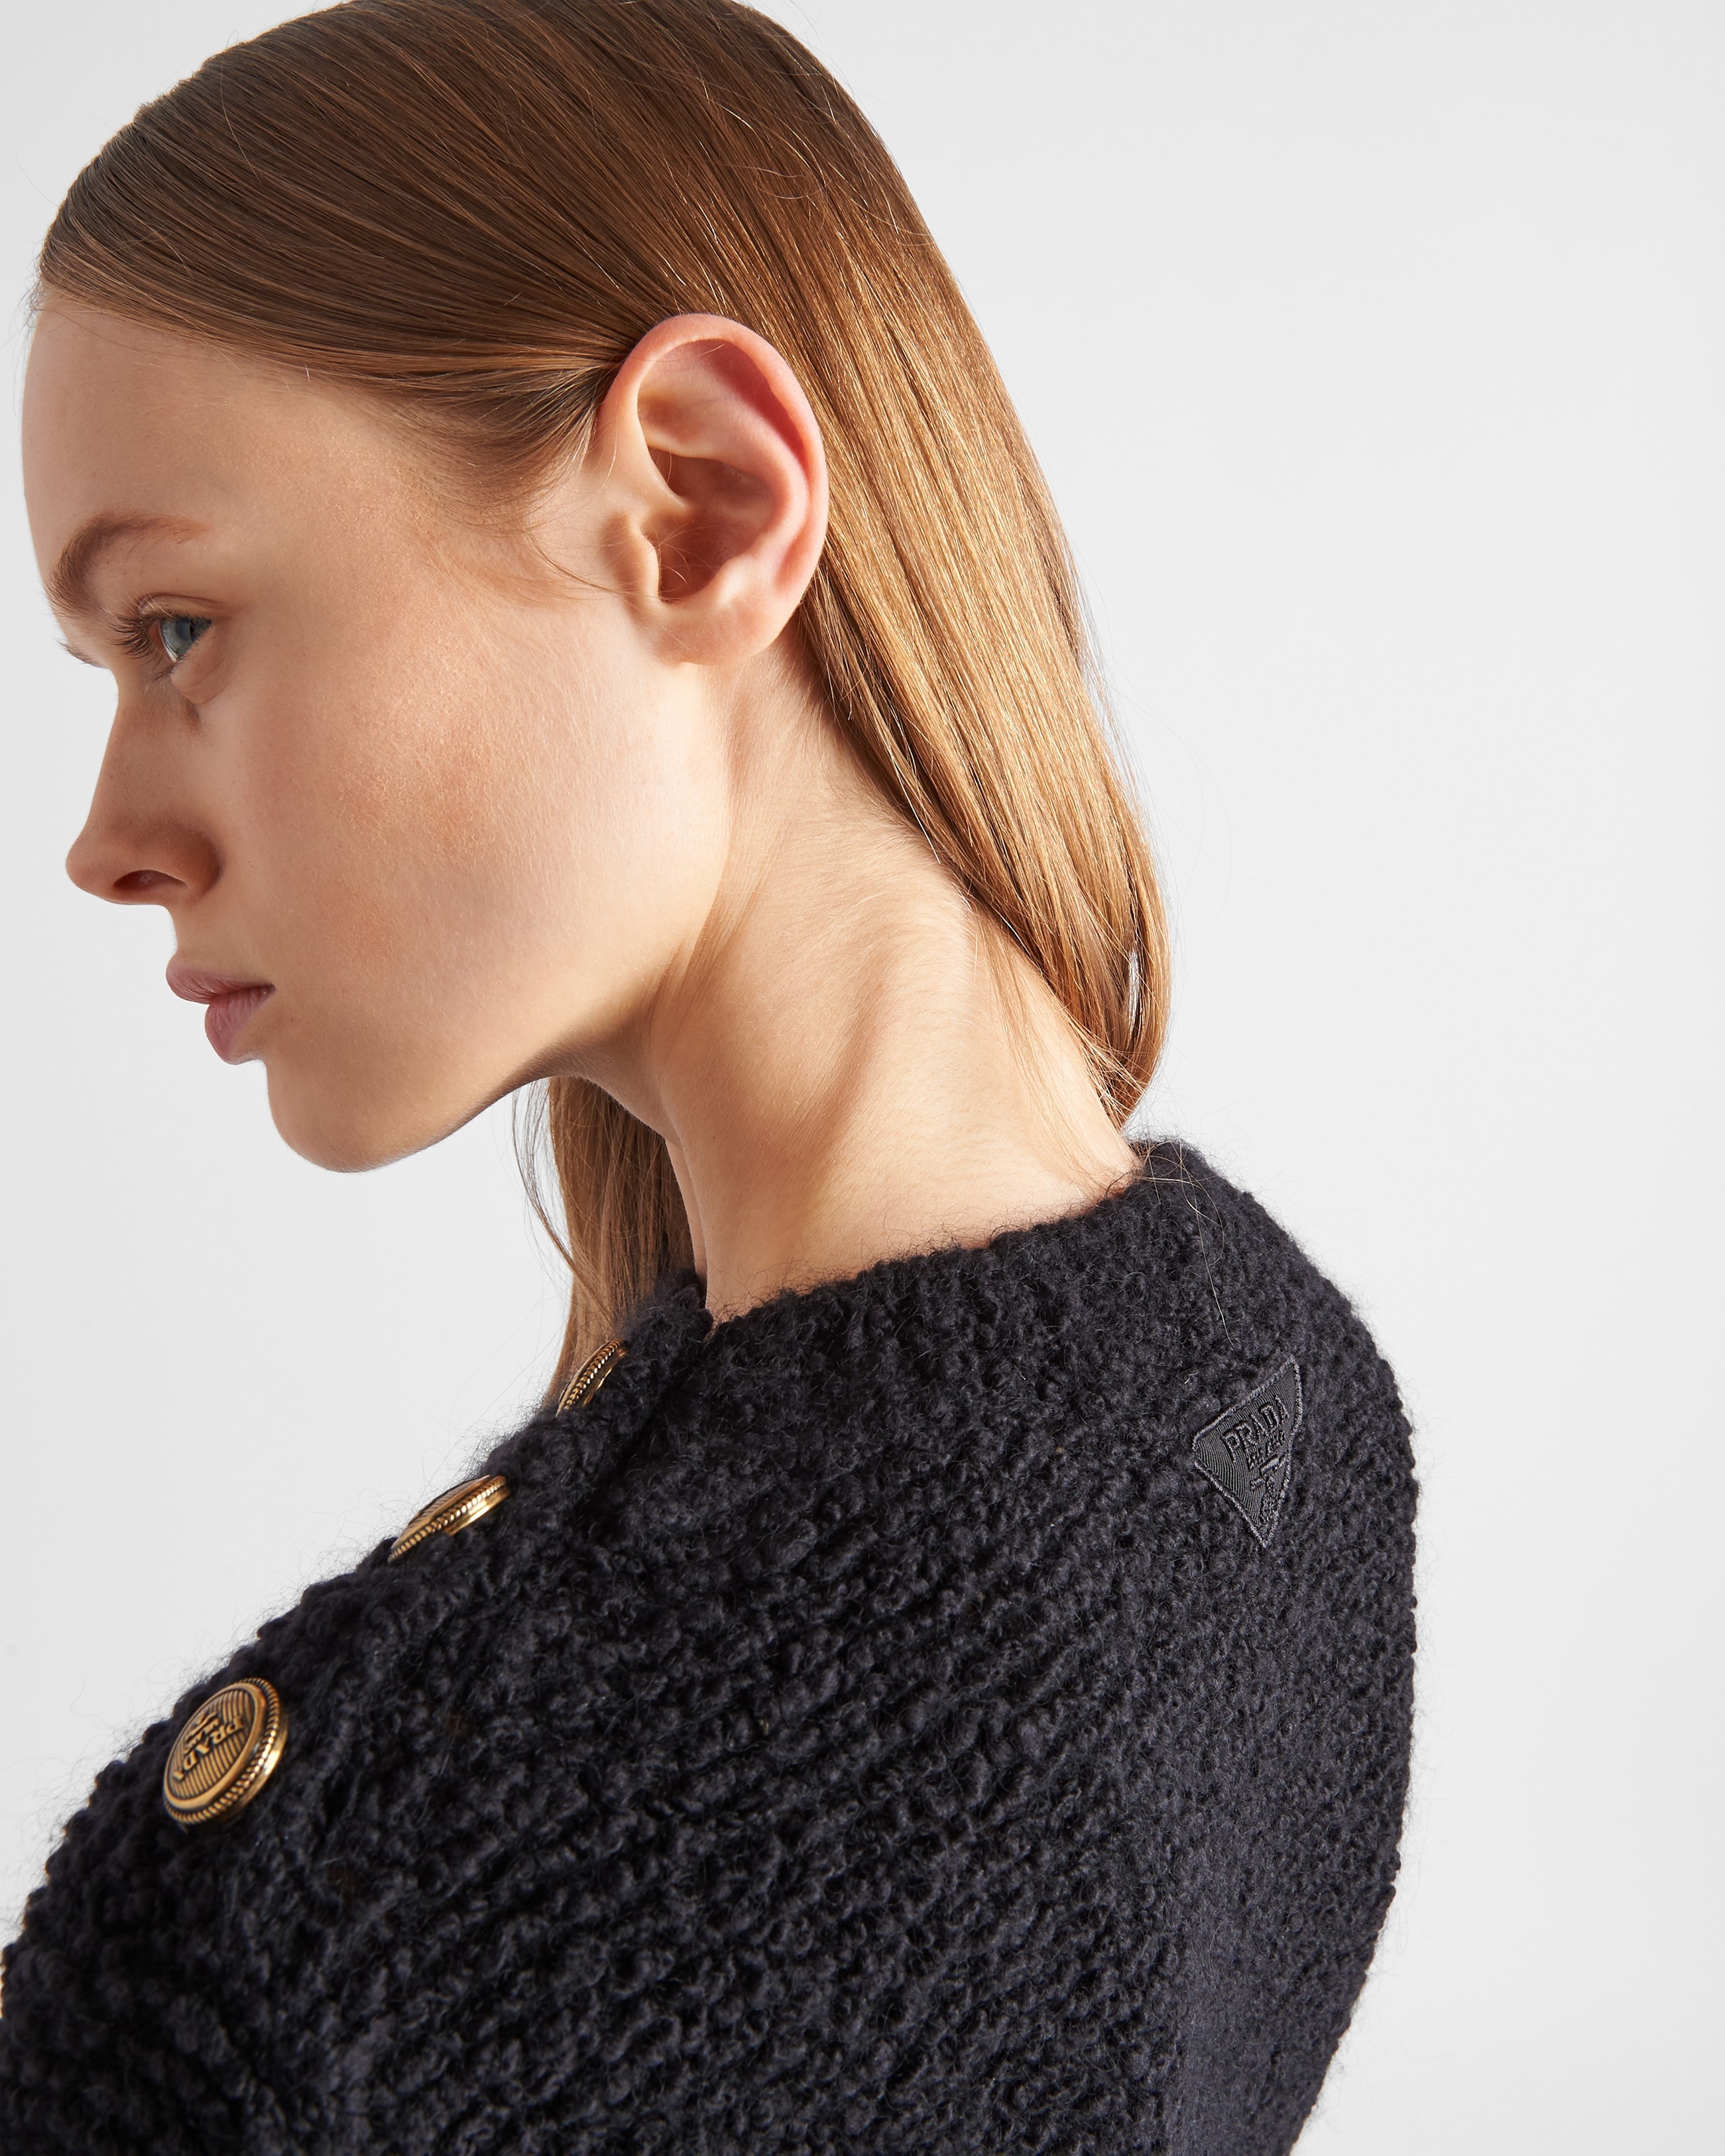 Prada Wool Boucle Knit Sweater with Shoulder Buttons - Bergdorf Goodman